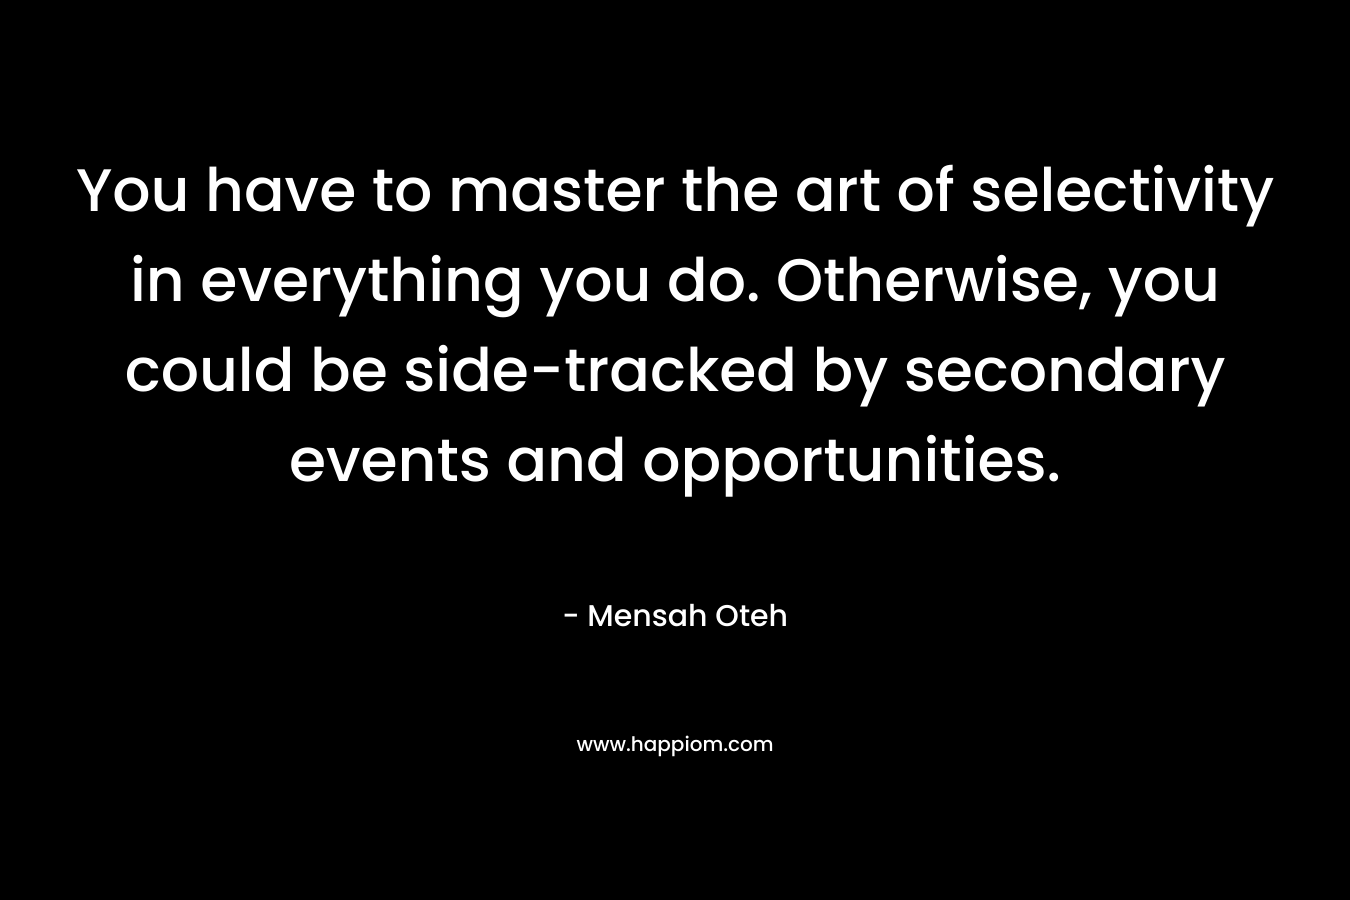 You have to master the art of selectivity in everything you do. Otherwise, you could be side-tracked by secondary events and opportunities.